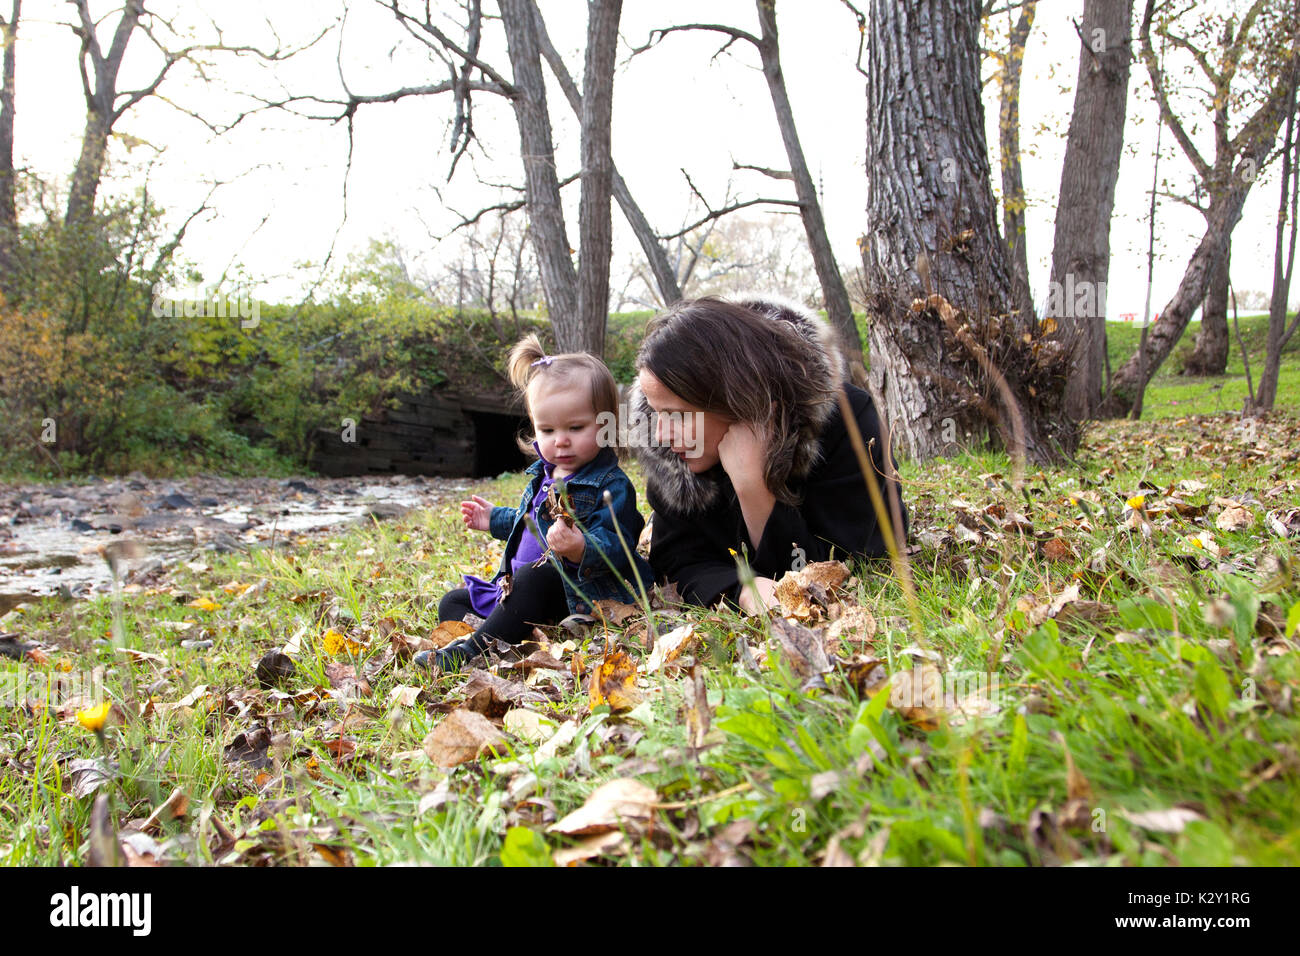 A close up of a mother and a toddler daughter in the grass with autumn foliage. Stock Photo